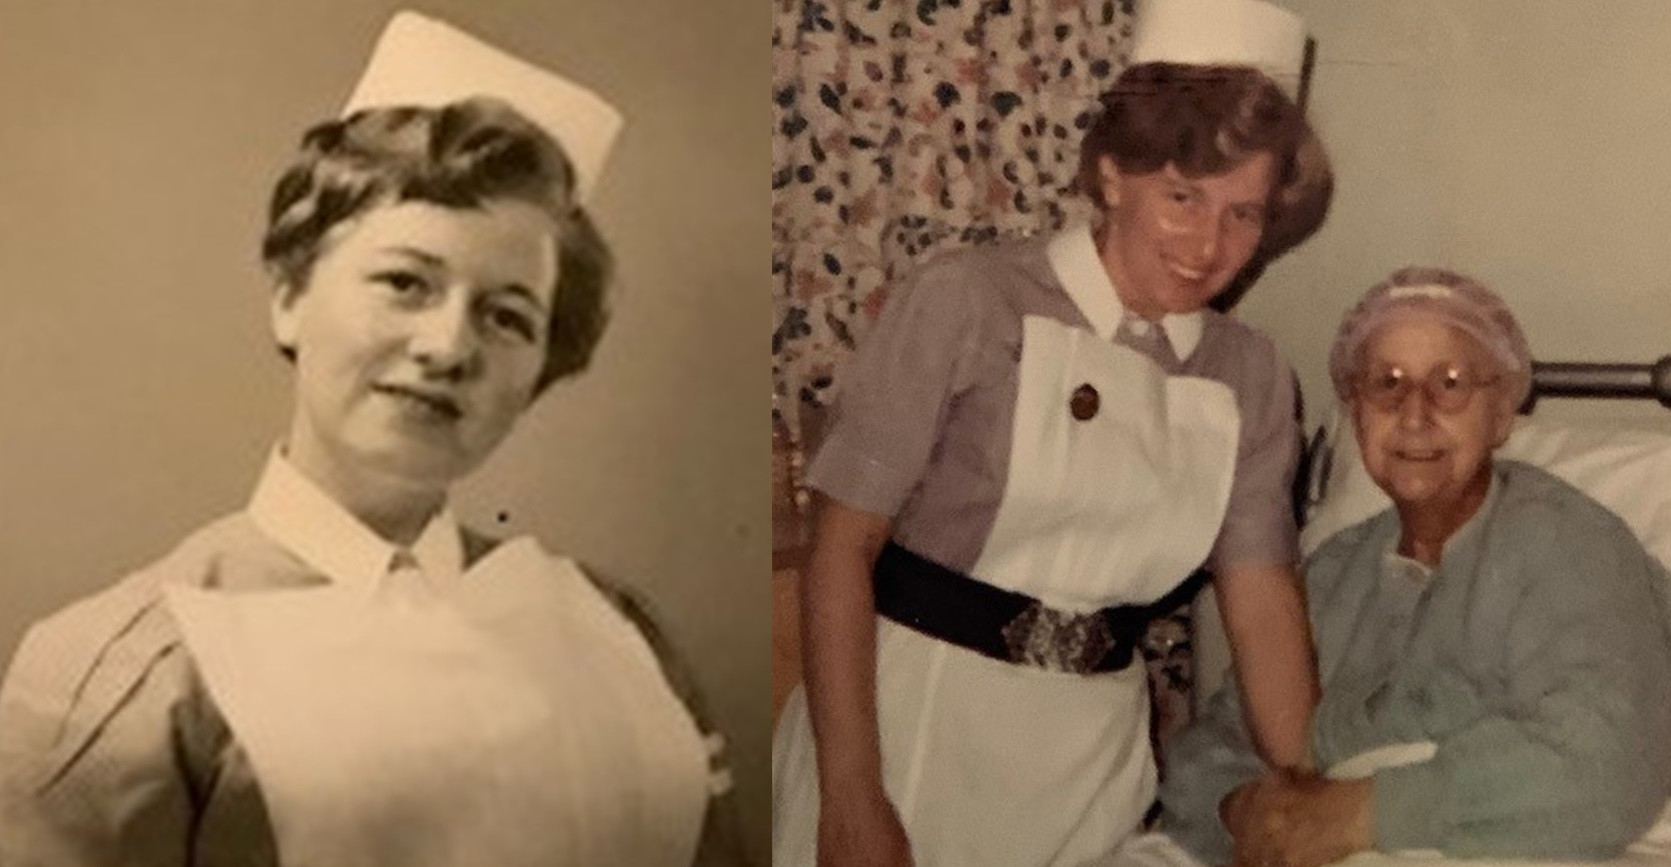 Two old photos of Peggy Pryer - one as a student nurse in the 1950s and one on a ward with a patient in the 1960s